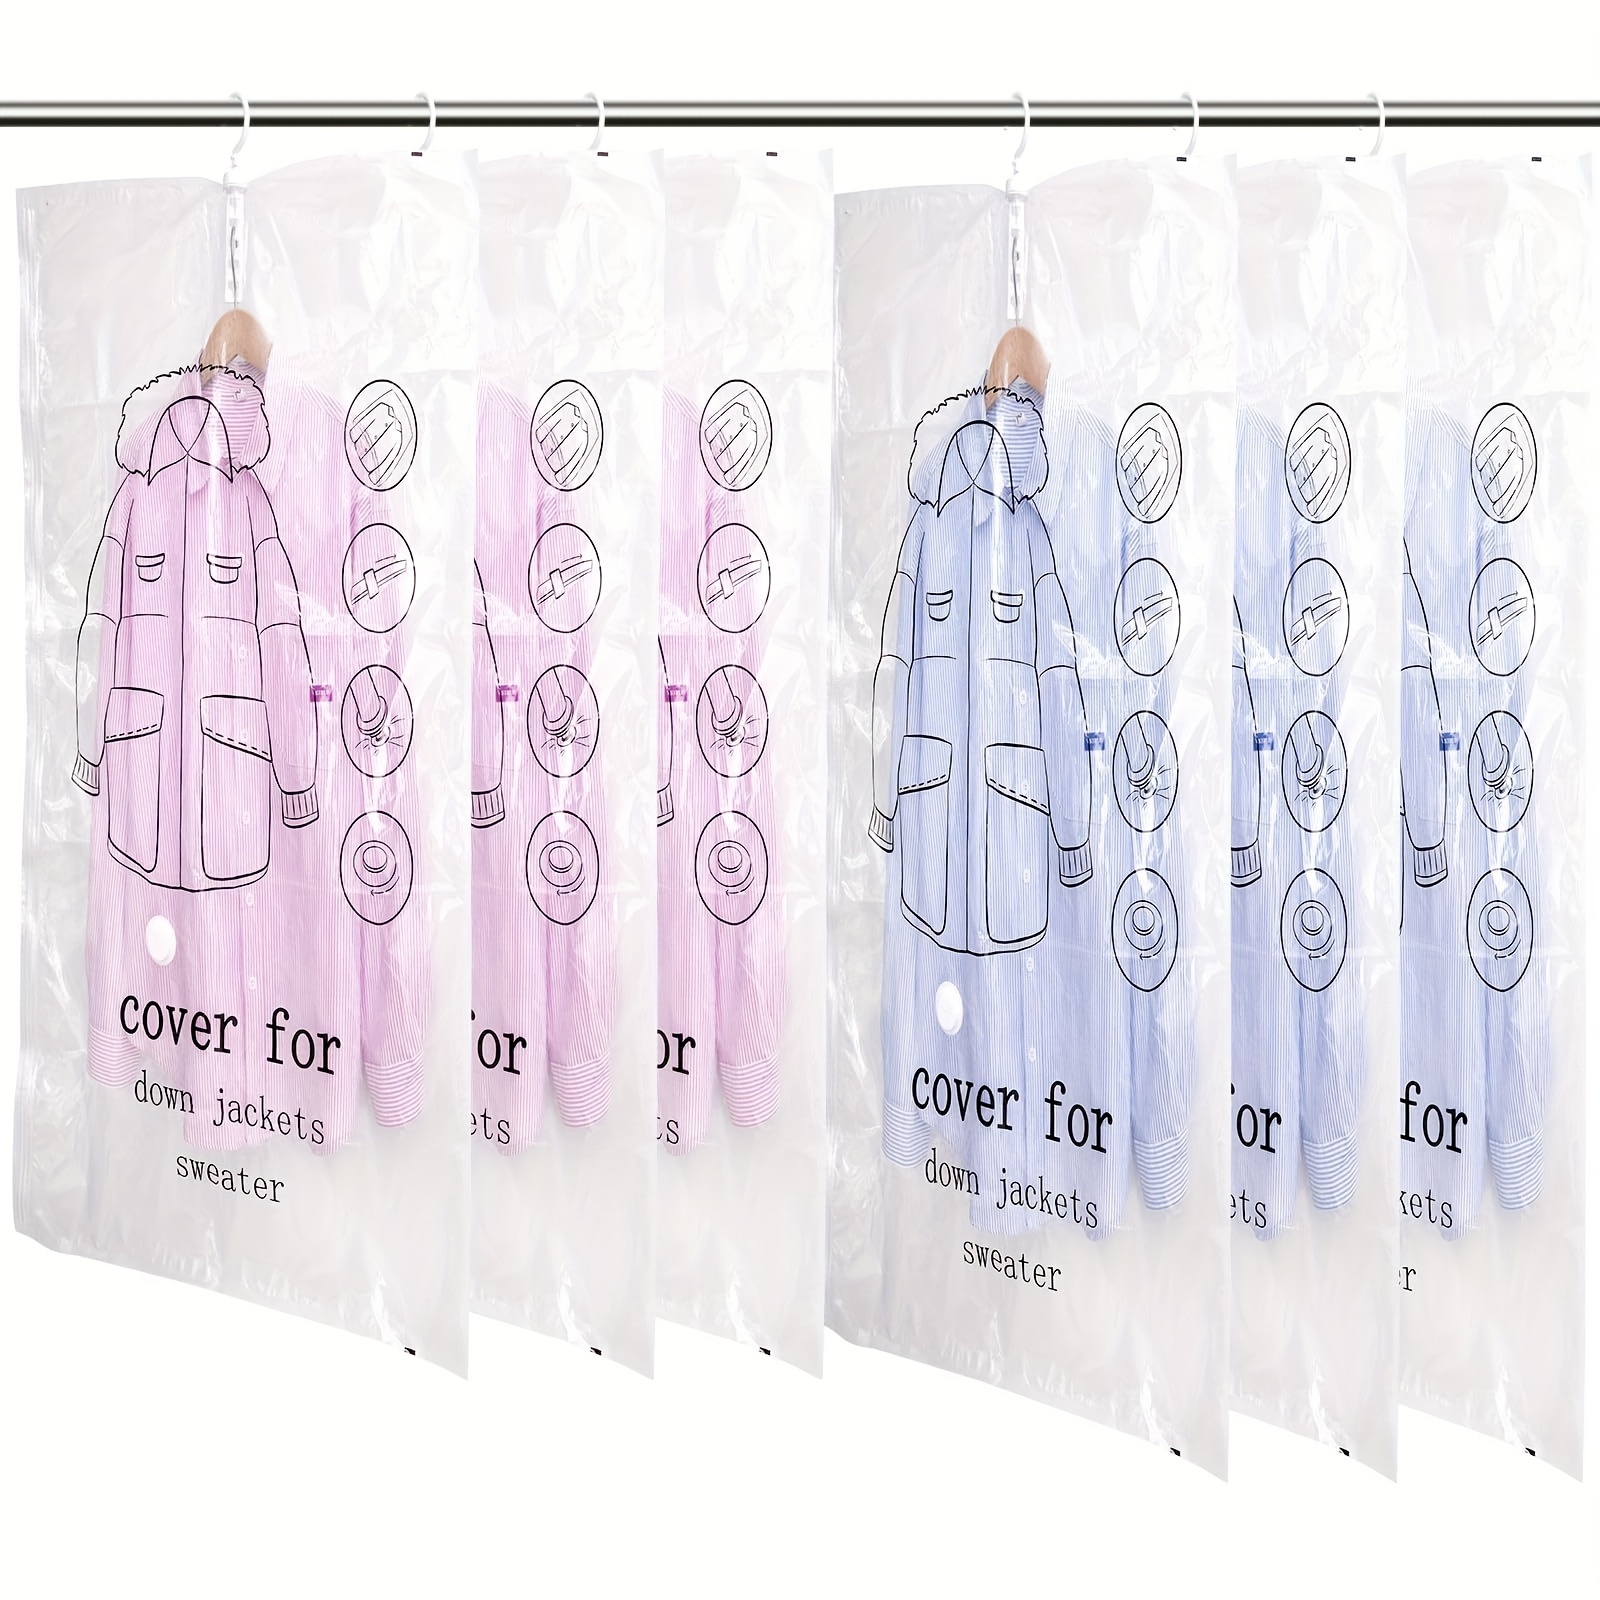 

1pc Vacuum Compression Hanging Storage Bag, Dustproof Sealed Storage Container For Clothes, Shirts, Household Space Saving Organizer For Dorm, Closet, Wardrobe, Bedroom, Bathroom